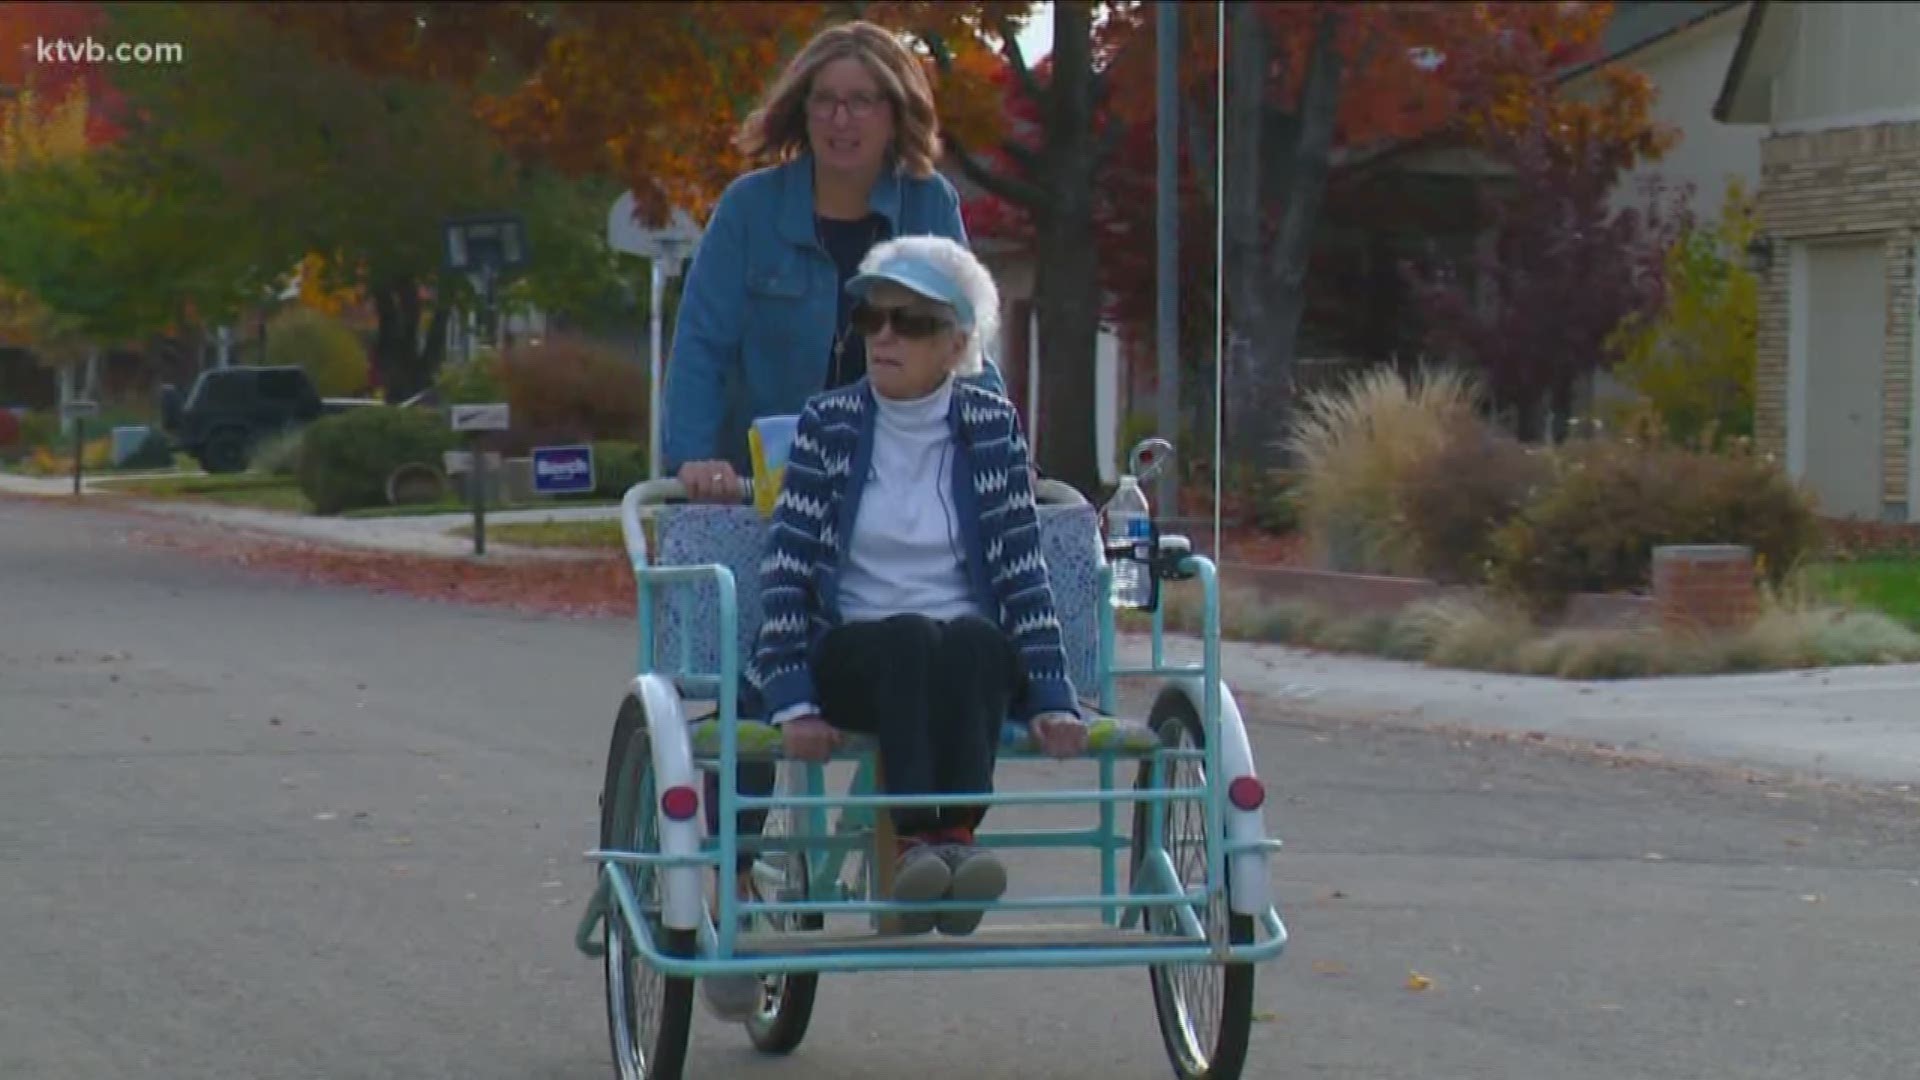 Rosemary Sorce loves to go on bikes rides with her family, and now she can.